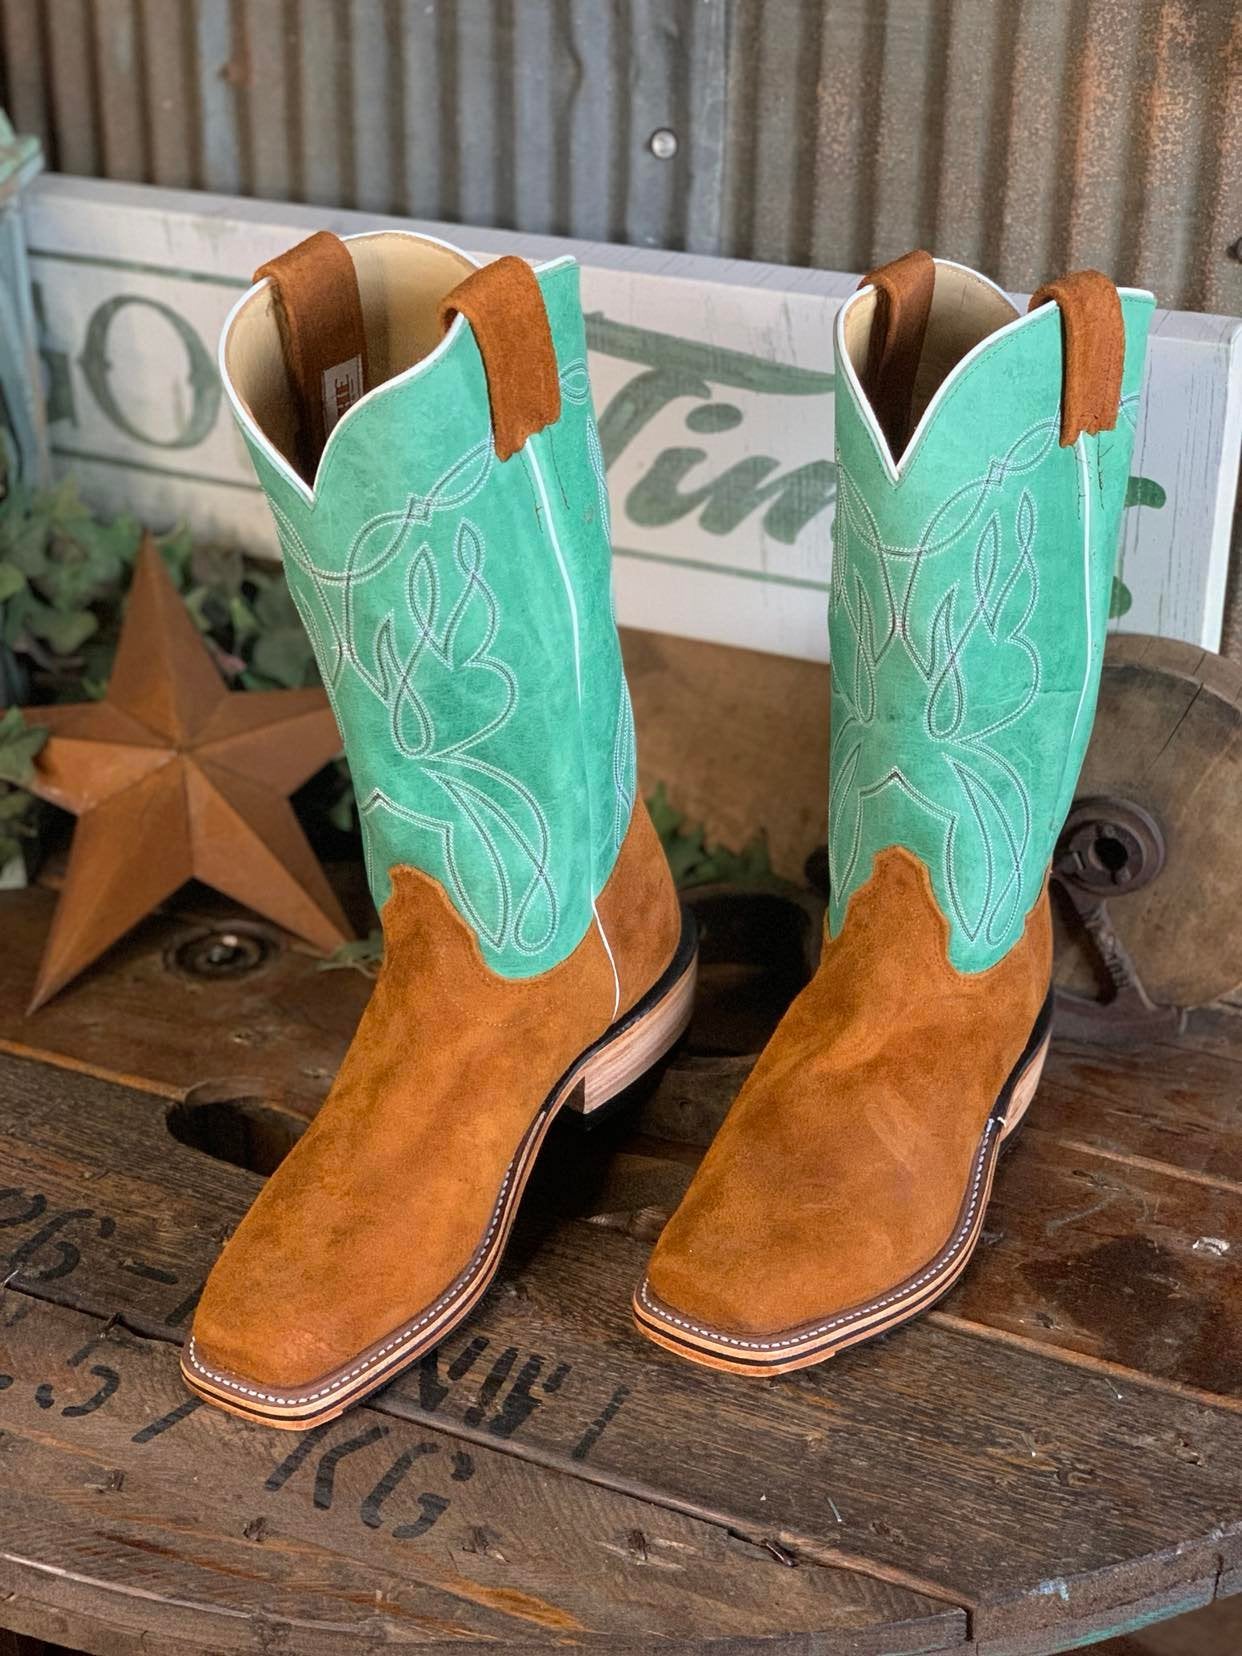 Olathe Wheatbuck Waxy Kudu and Green Super Oil Cutter Toe Boot-Men's Boots-Anderson Bean-Lucky J Boots & More, Women's, Men's, & Kids Western Store Located in Carthage, MO